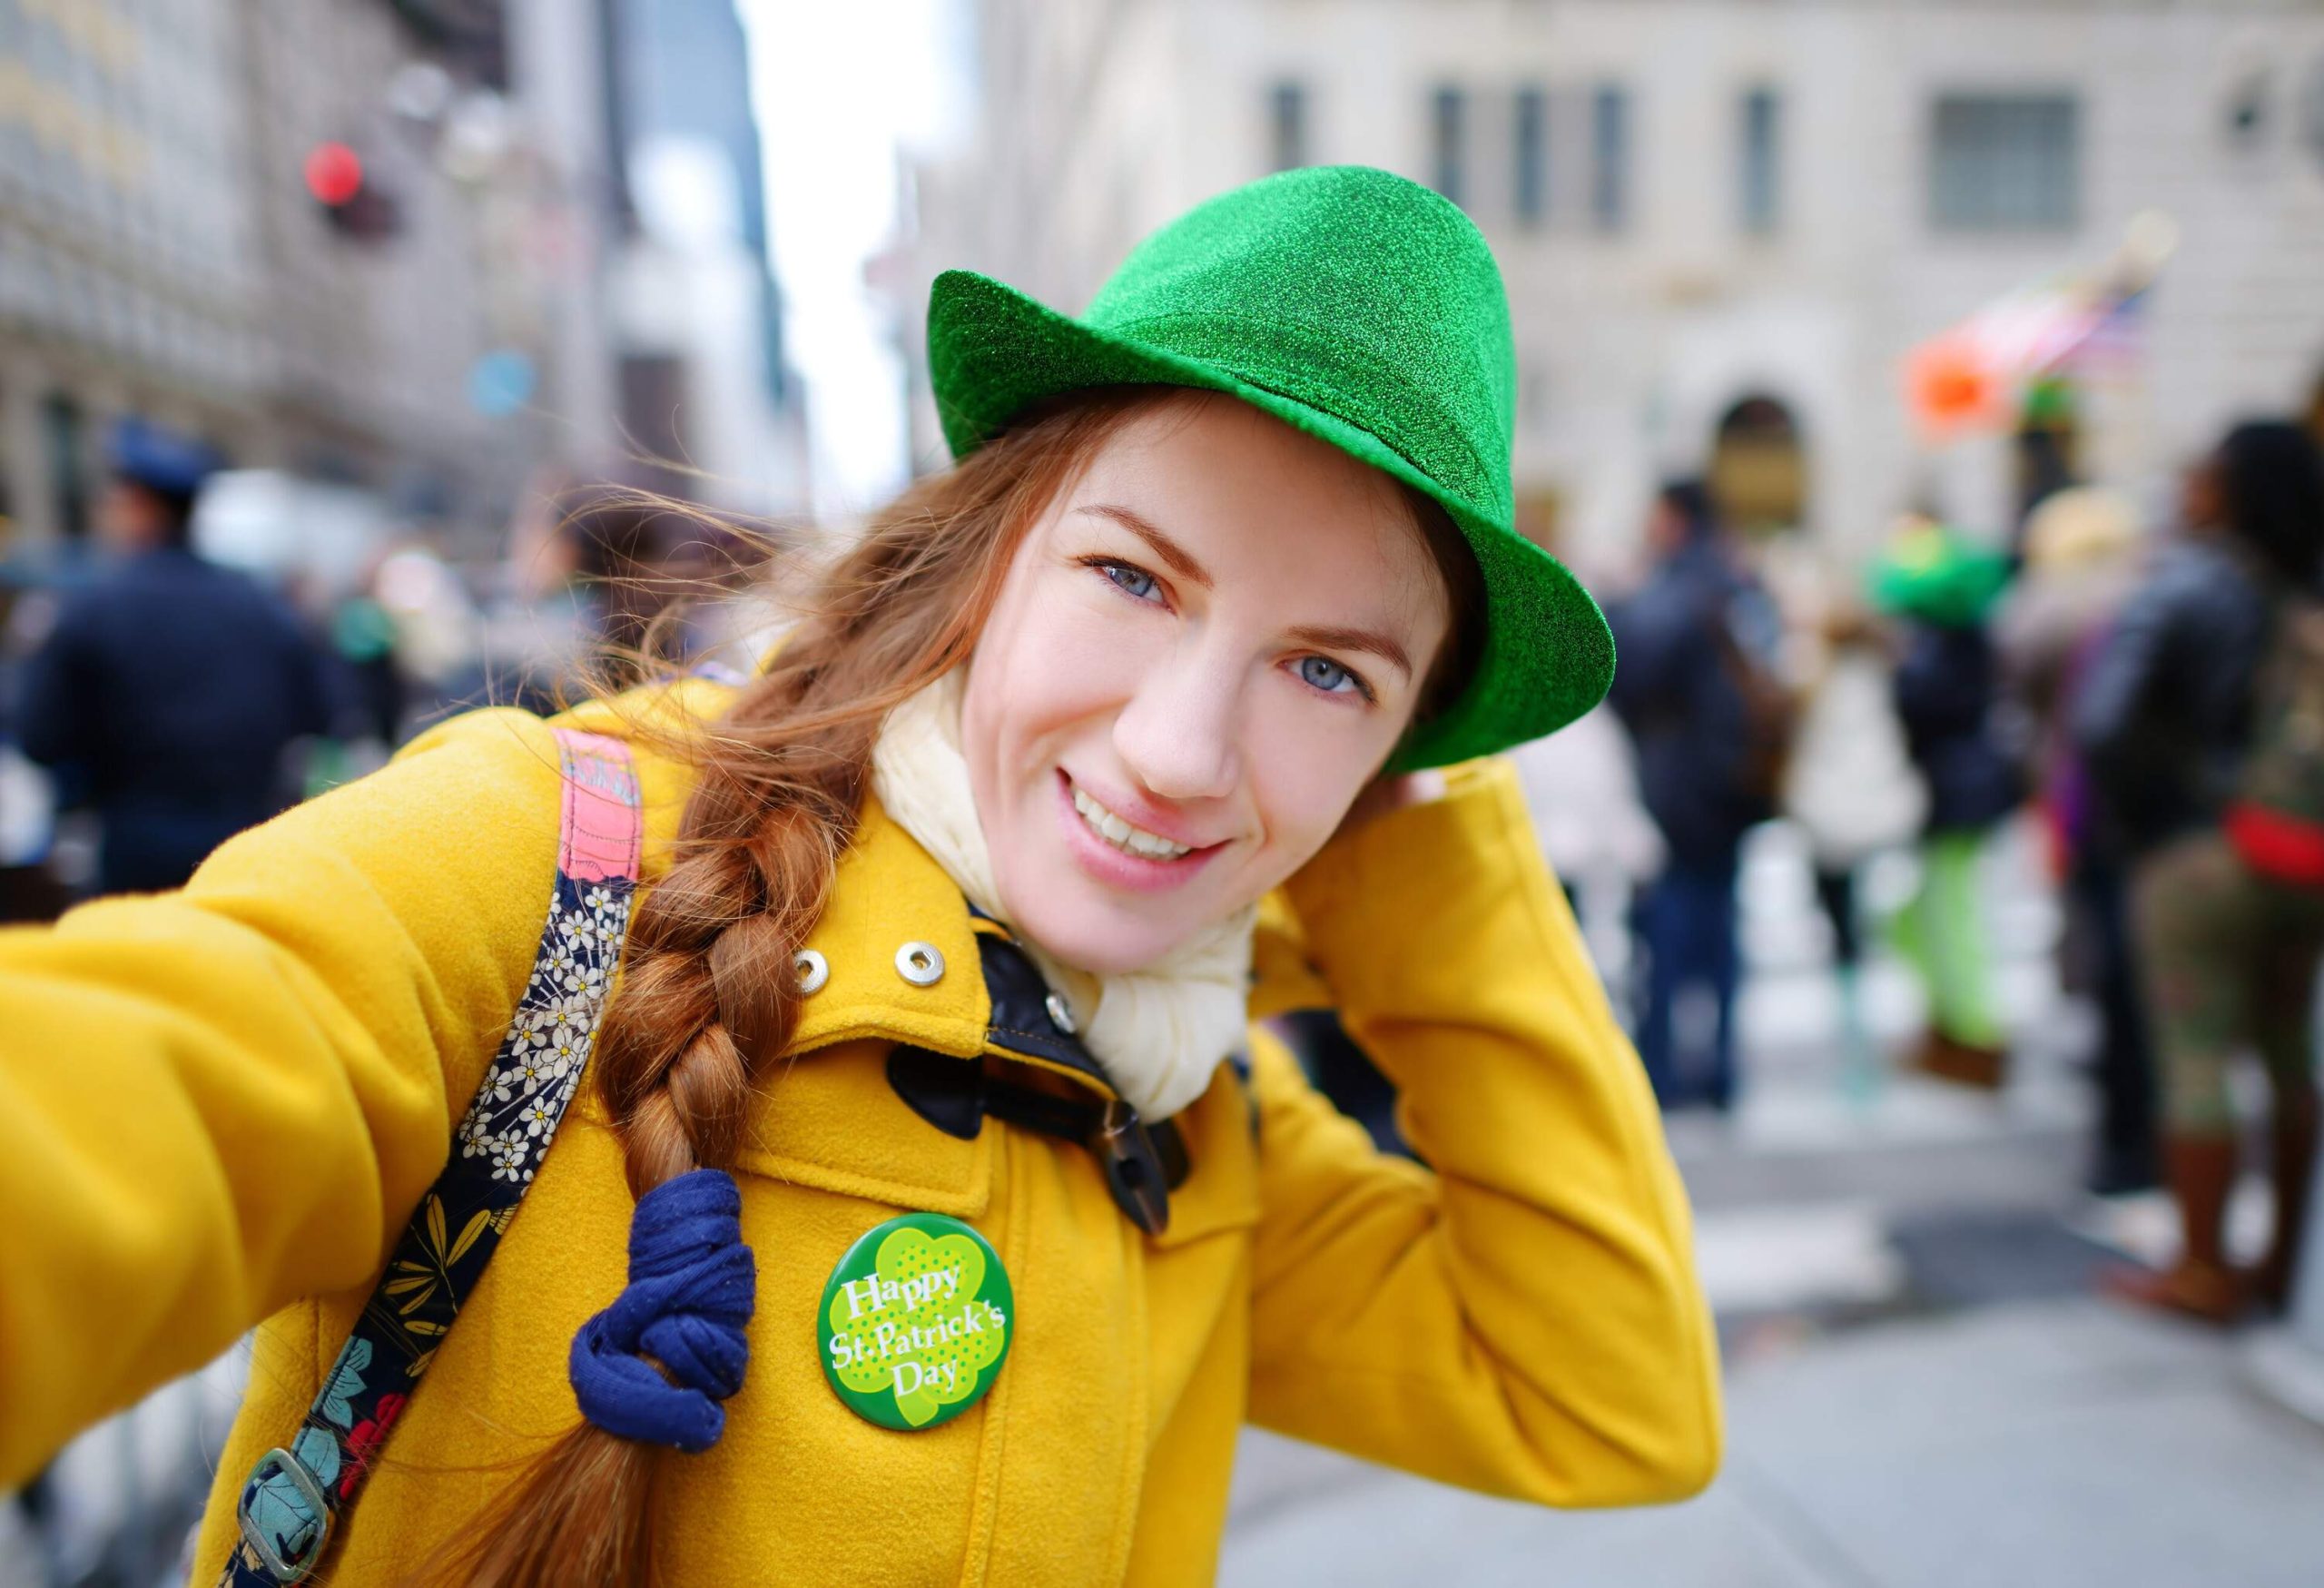 Portrait of a happy woman in a yellow jacket and green hat against the bokeh background of the crowd.